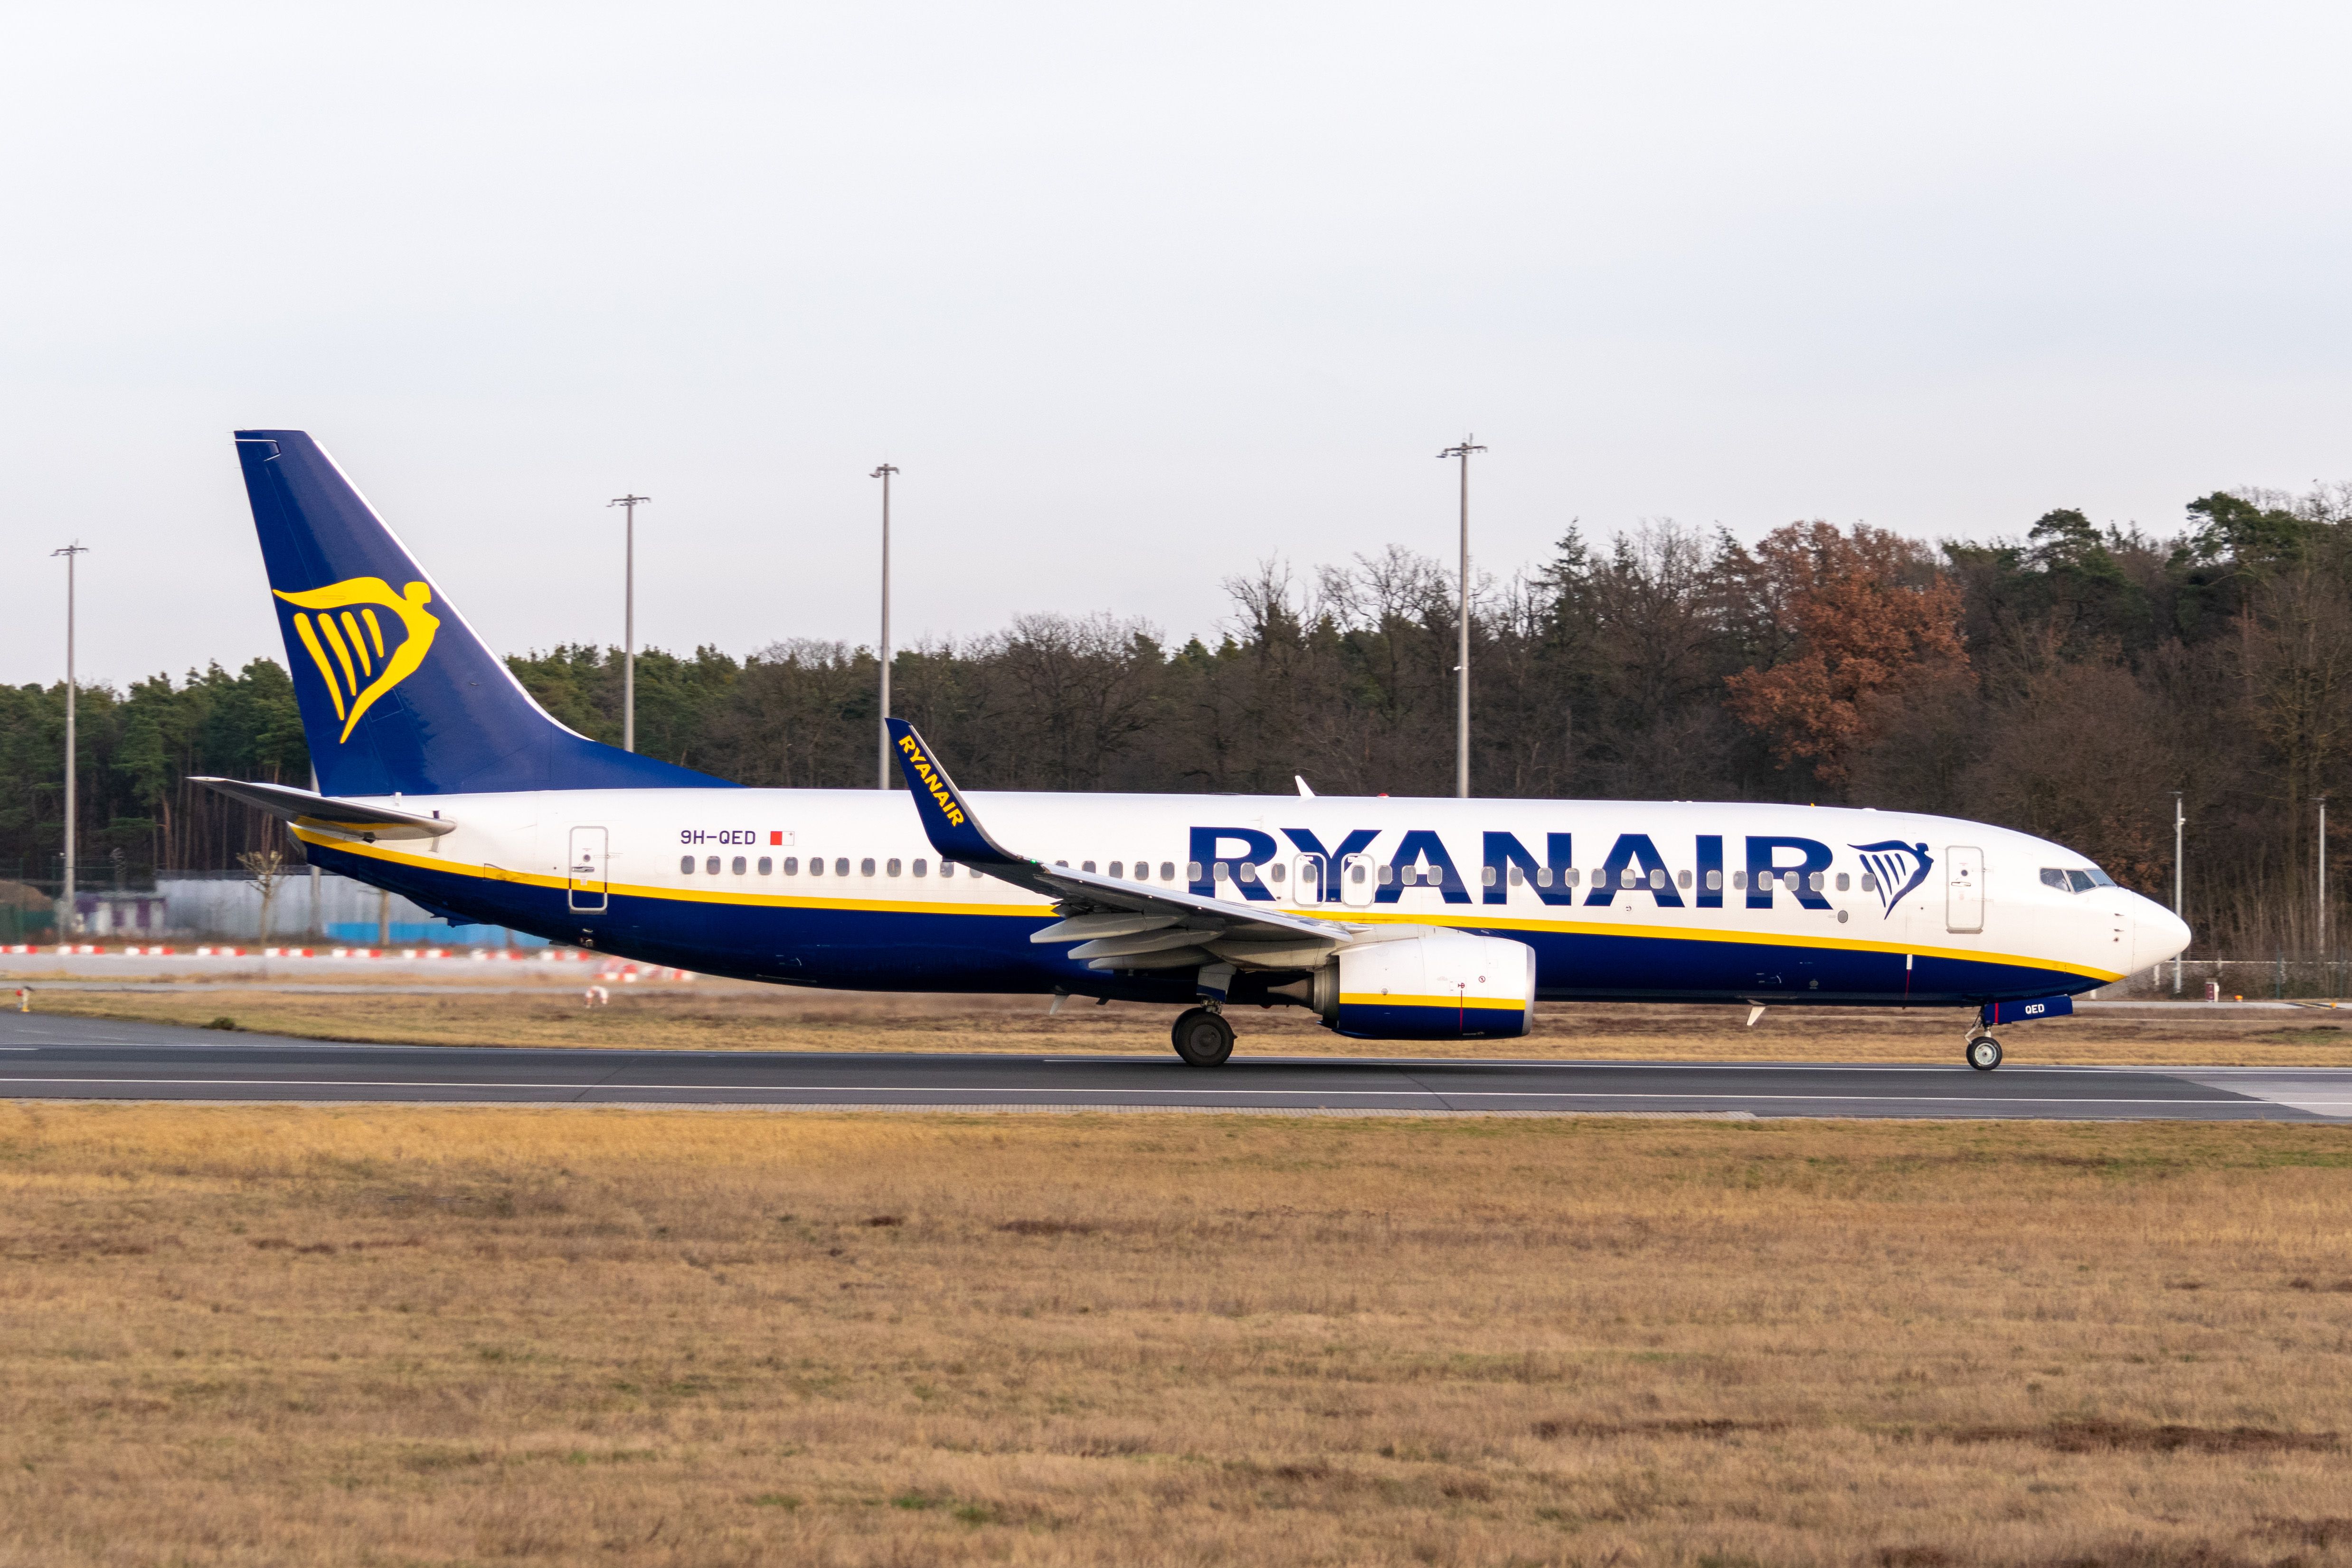 A Ryanair Boeing 737 at the end of a runway.